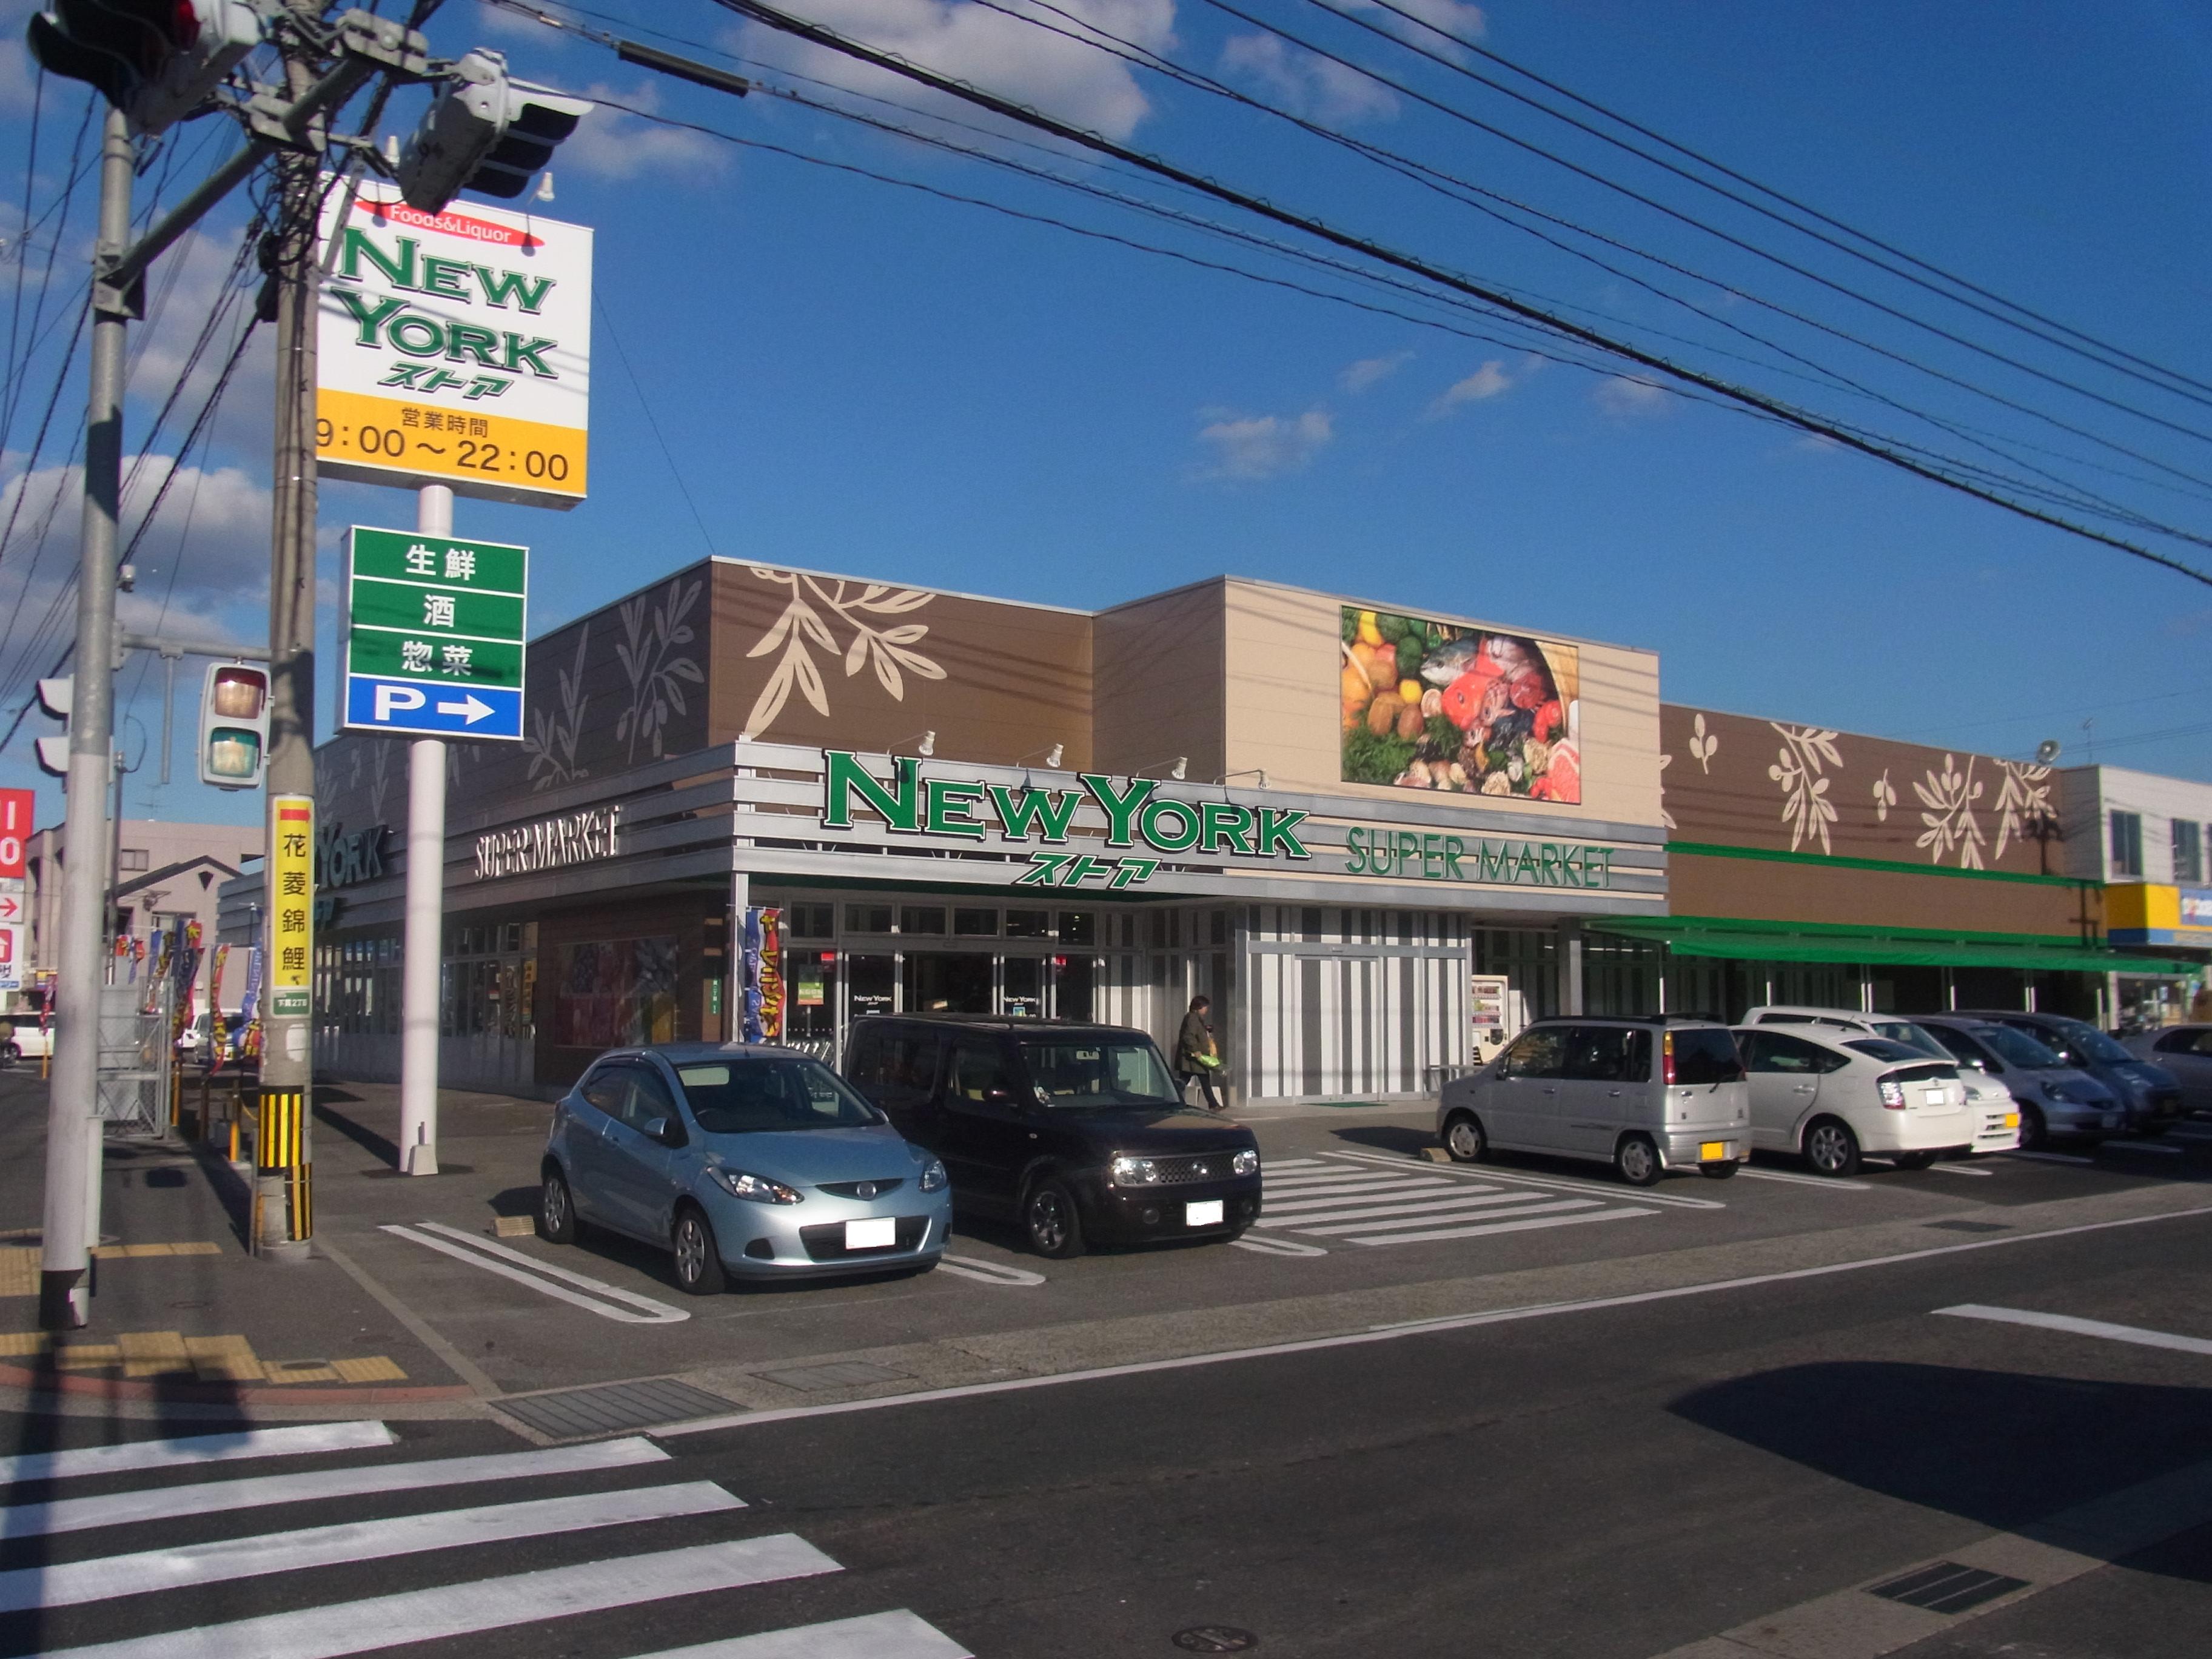 Supermarket. 781m to New York store transmural store (Super)